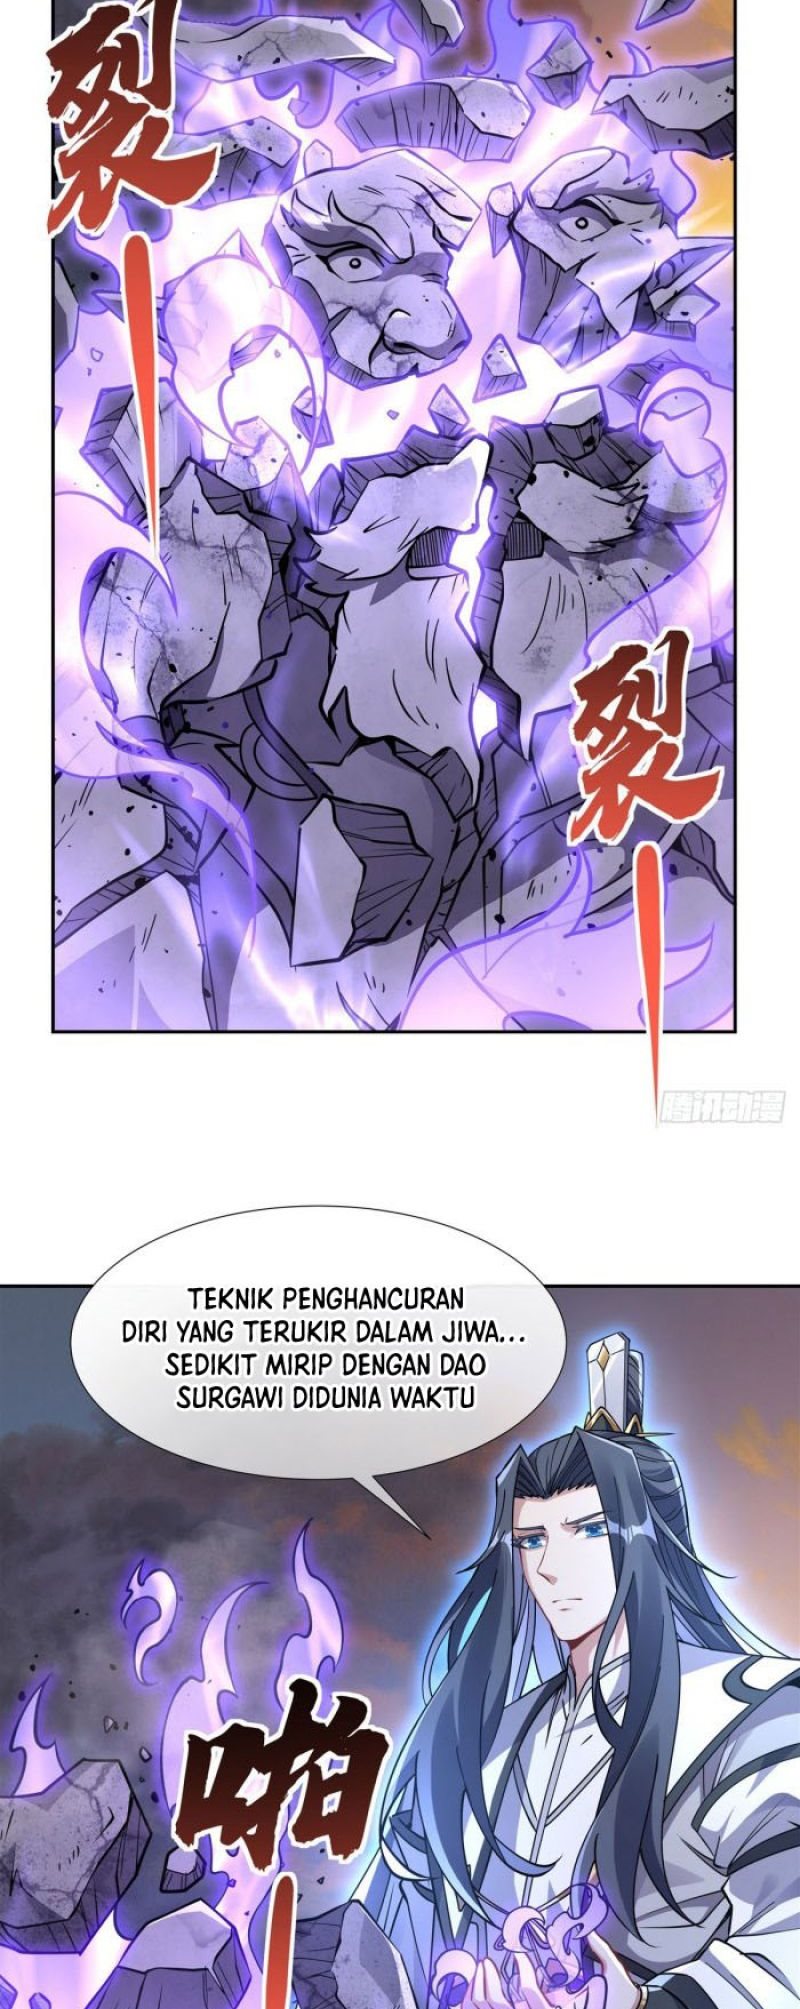 Dilarang COPAS - situs resmi www.mangacanblog.com - Komik my female apprentices are all big shots from the future 135 - chapter 135 136 Indonesia my female apprentices are all big shots from the future 135 - chapter 135 Terbaru 21|Baca Manga Komik Indonesia|Mangacan